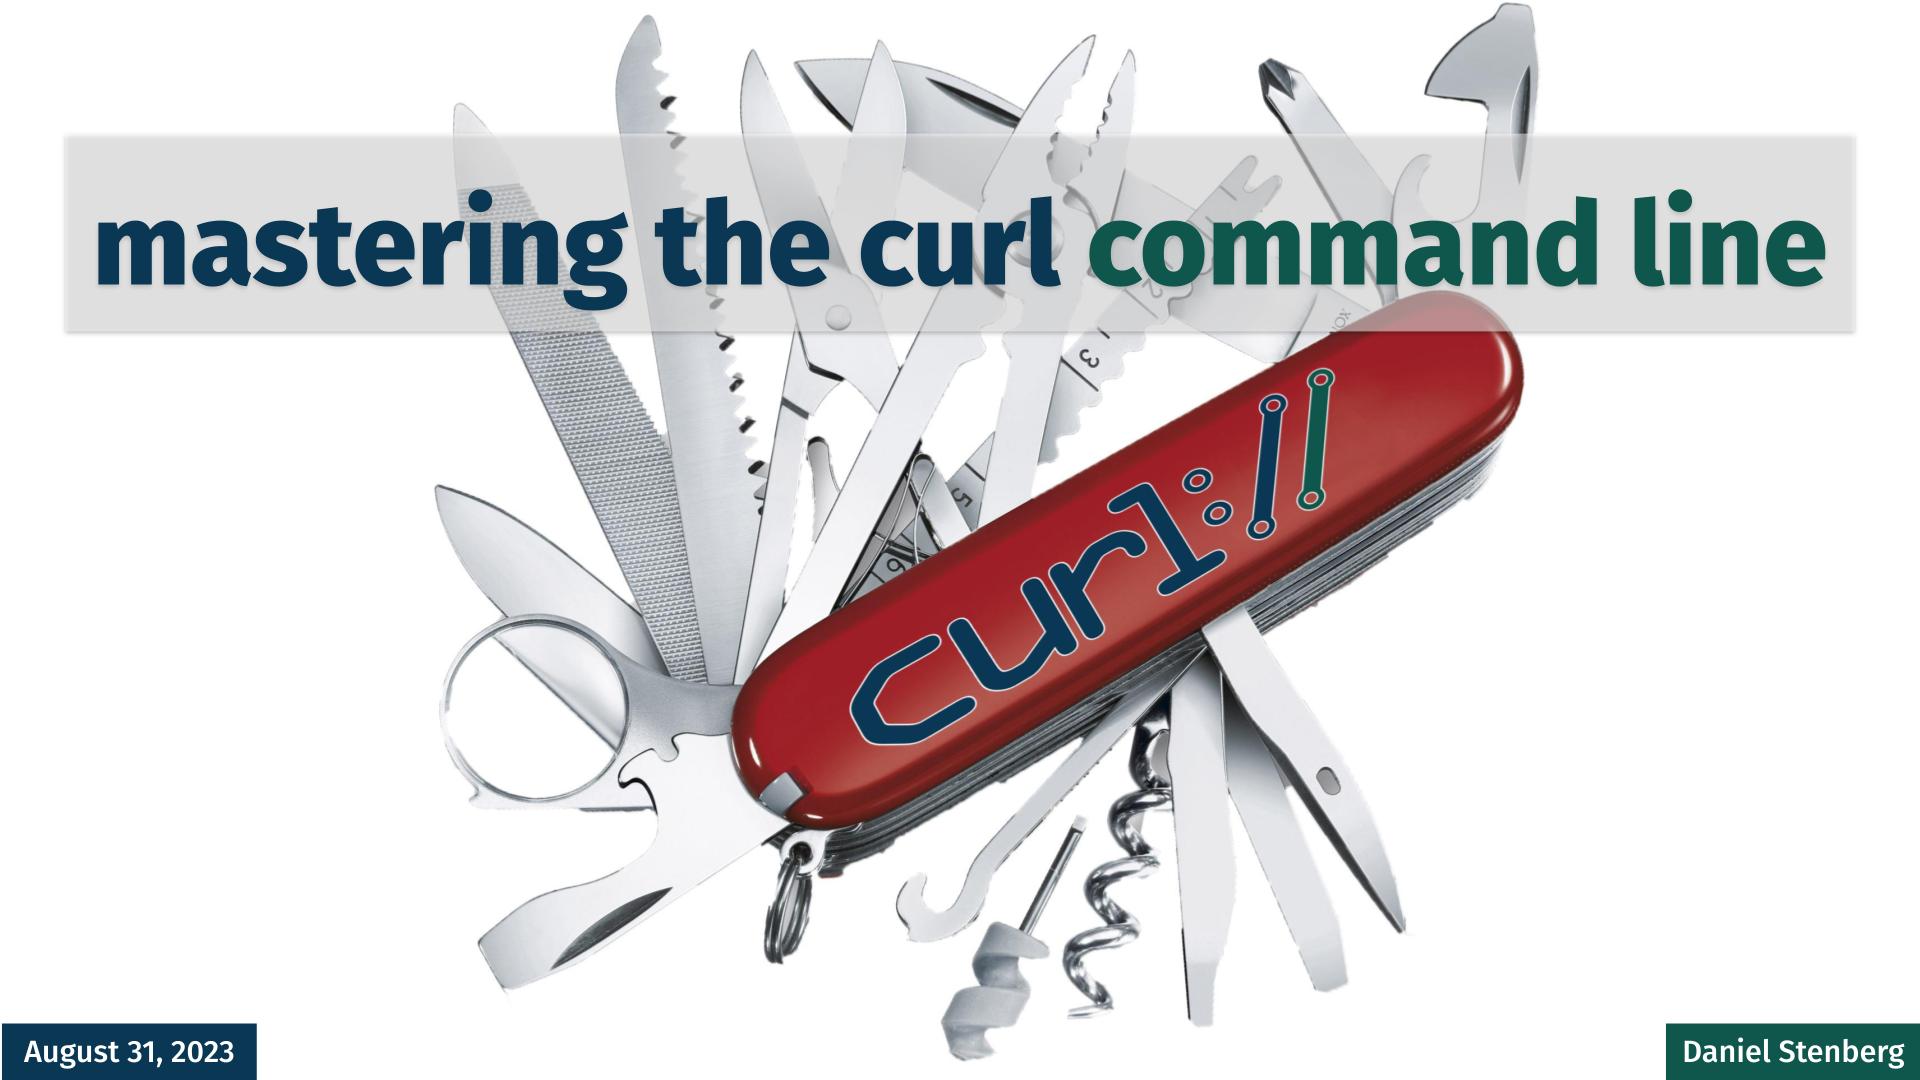 Mastering the curl command line